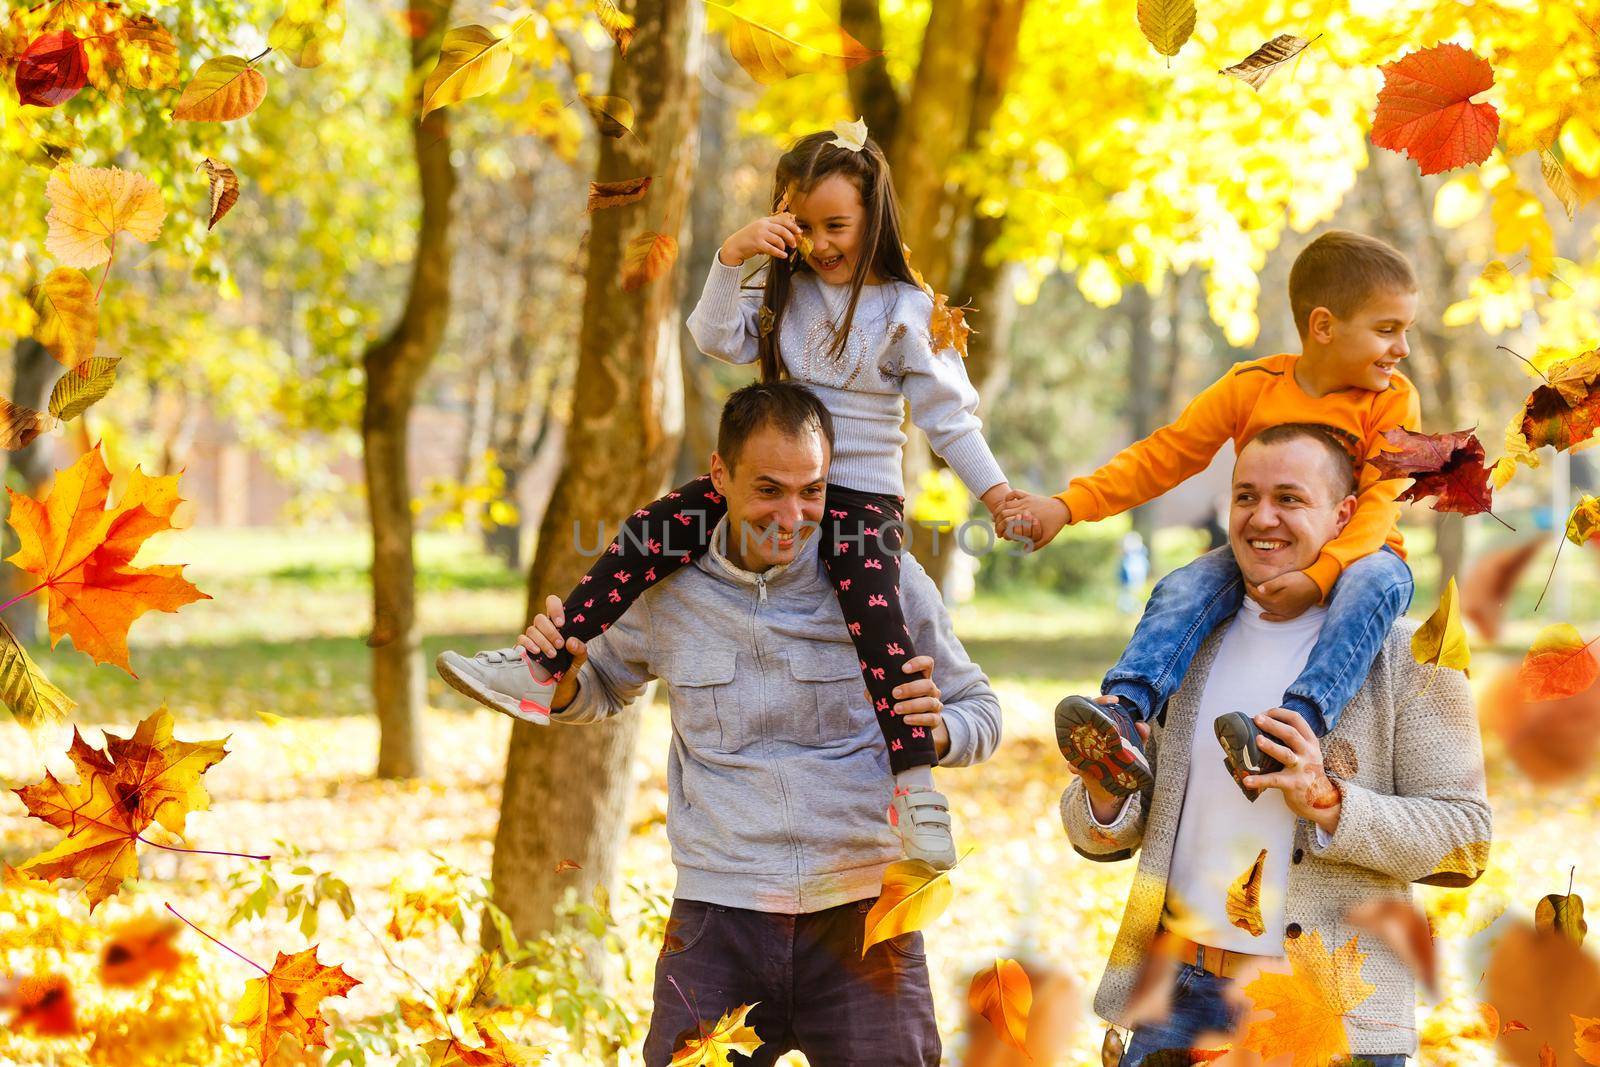 family walking in an autumn park with fallen fall leaves. High quality photo